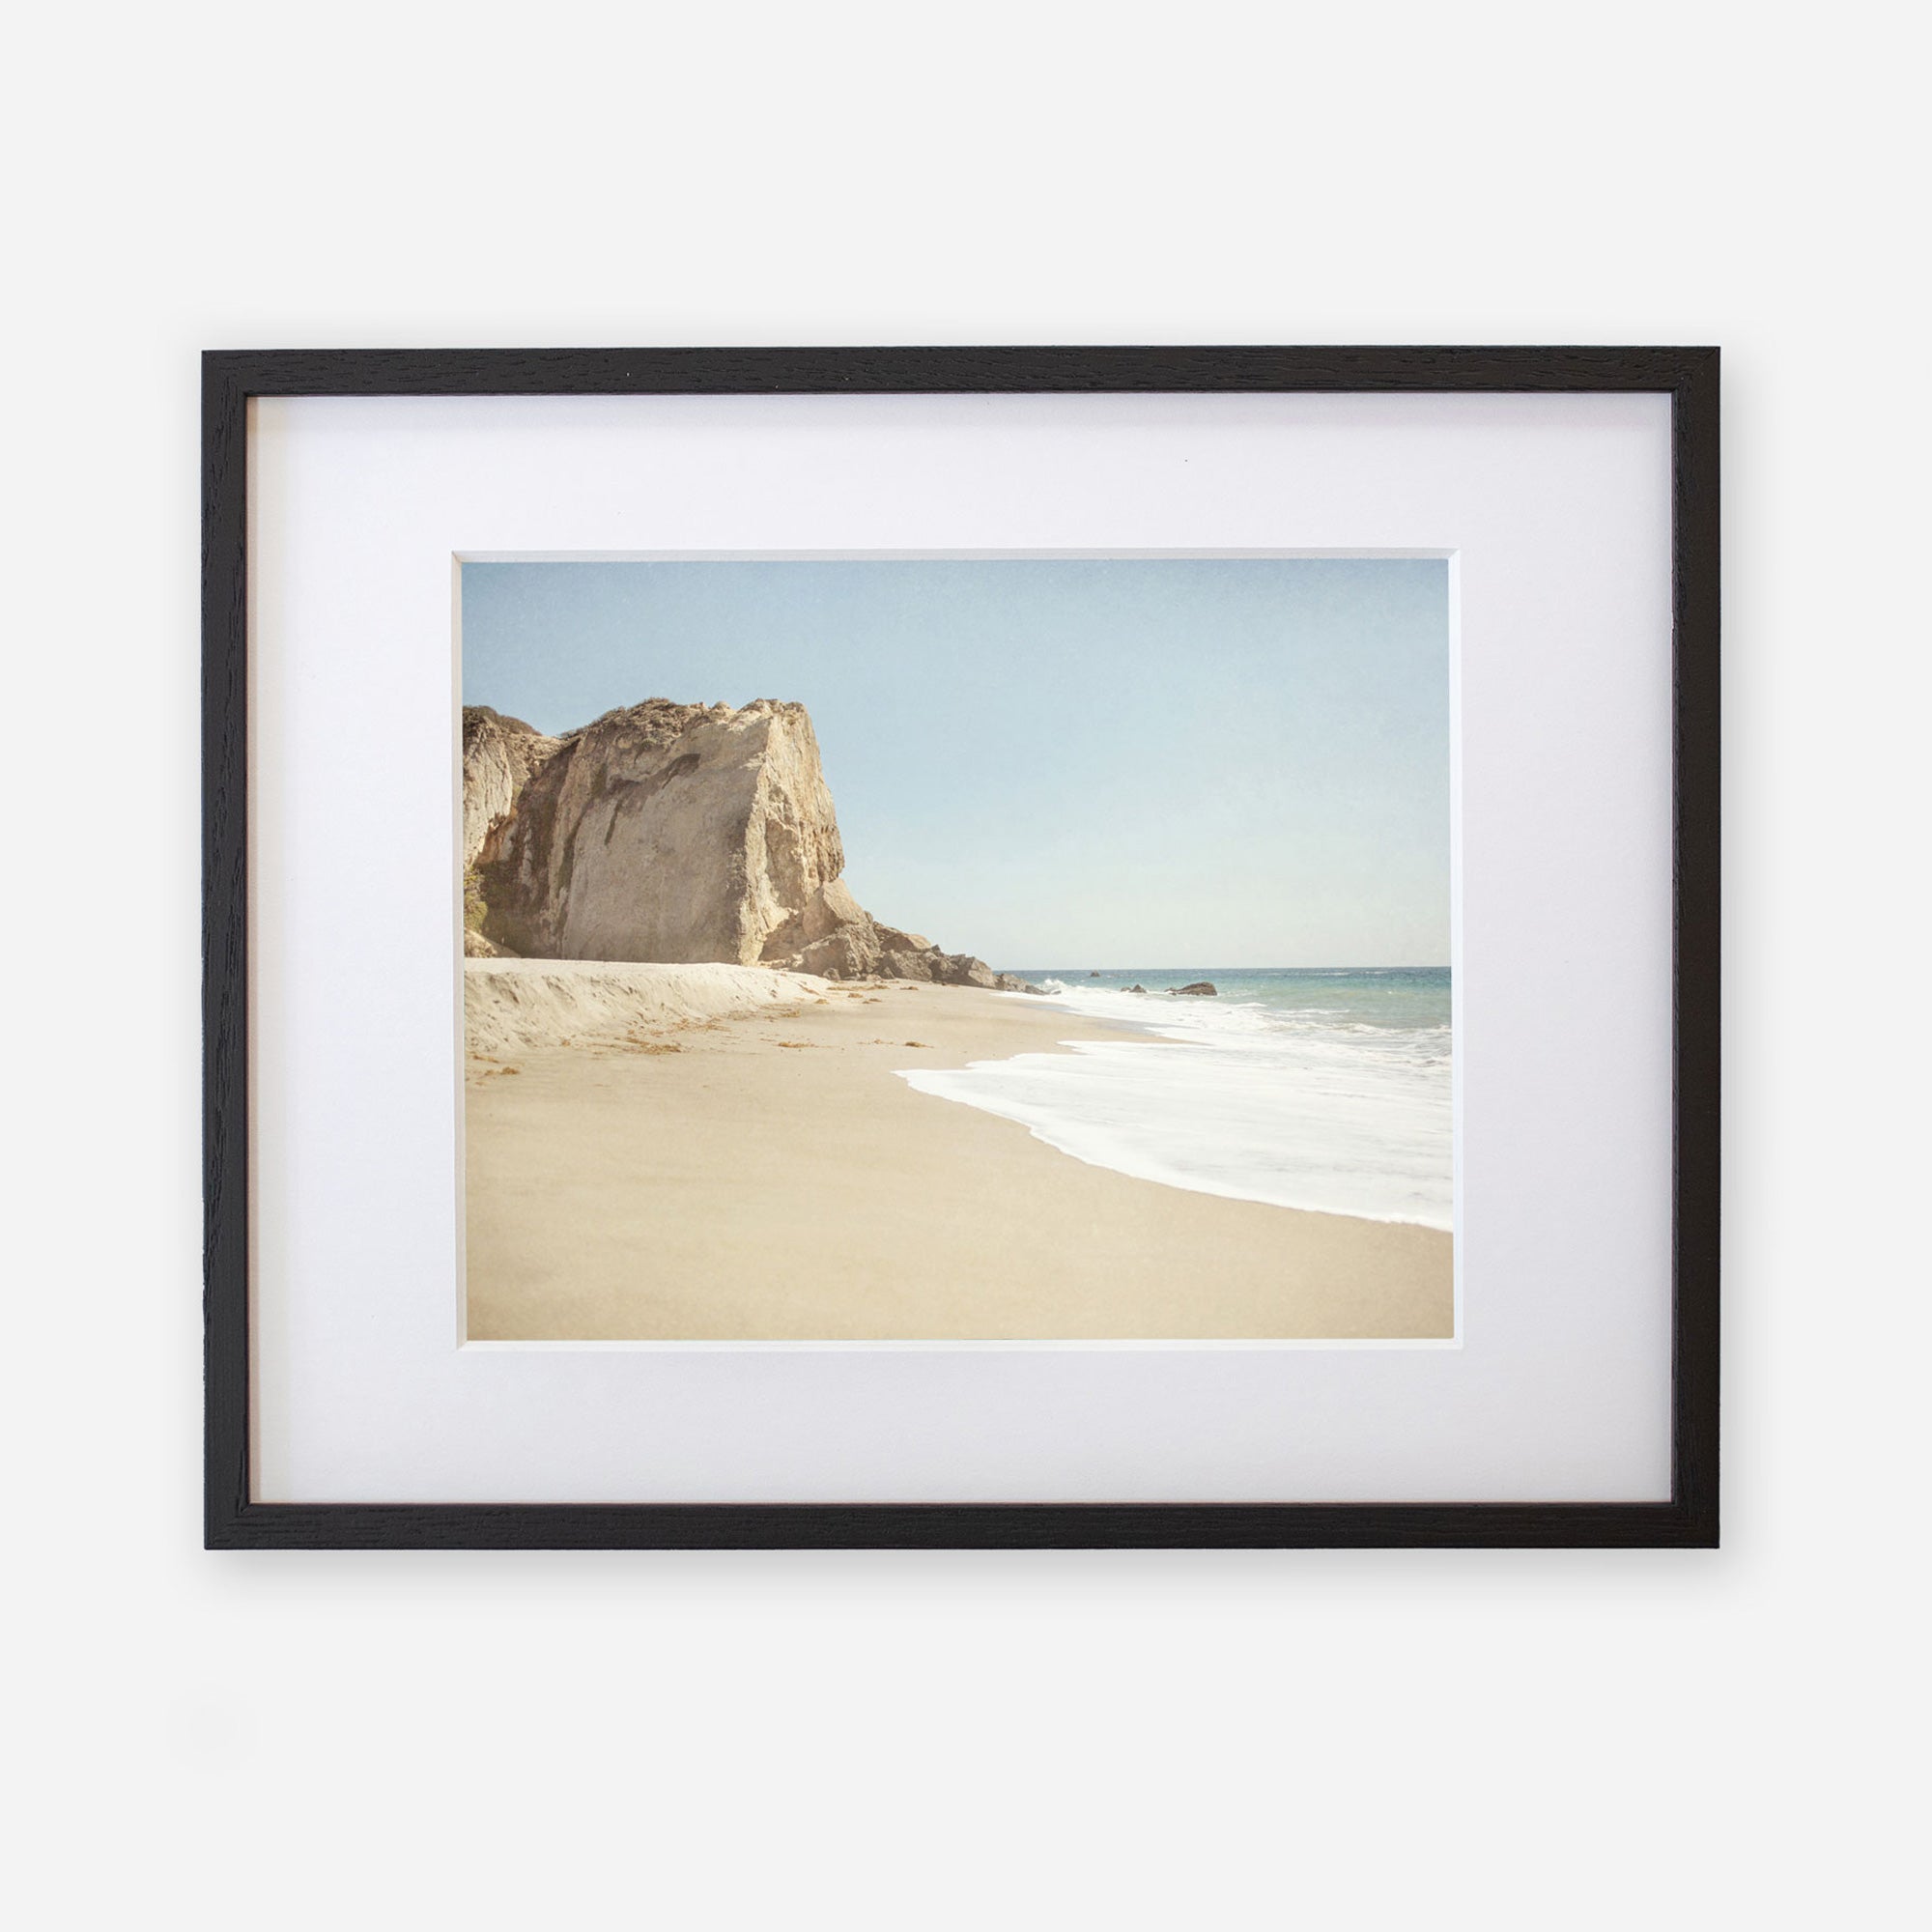 Offley Green&#39;s California Malibu Print, &#39;Point Dume&#39; featuring a serene beach scene with a sandy shore, gentle waves, and a large rock formation at Point Dume under a clear sky.